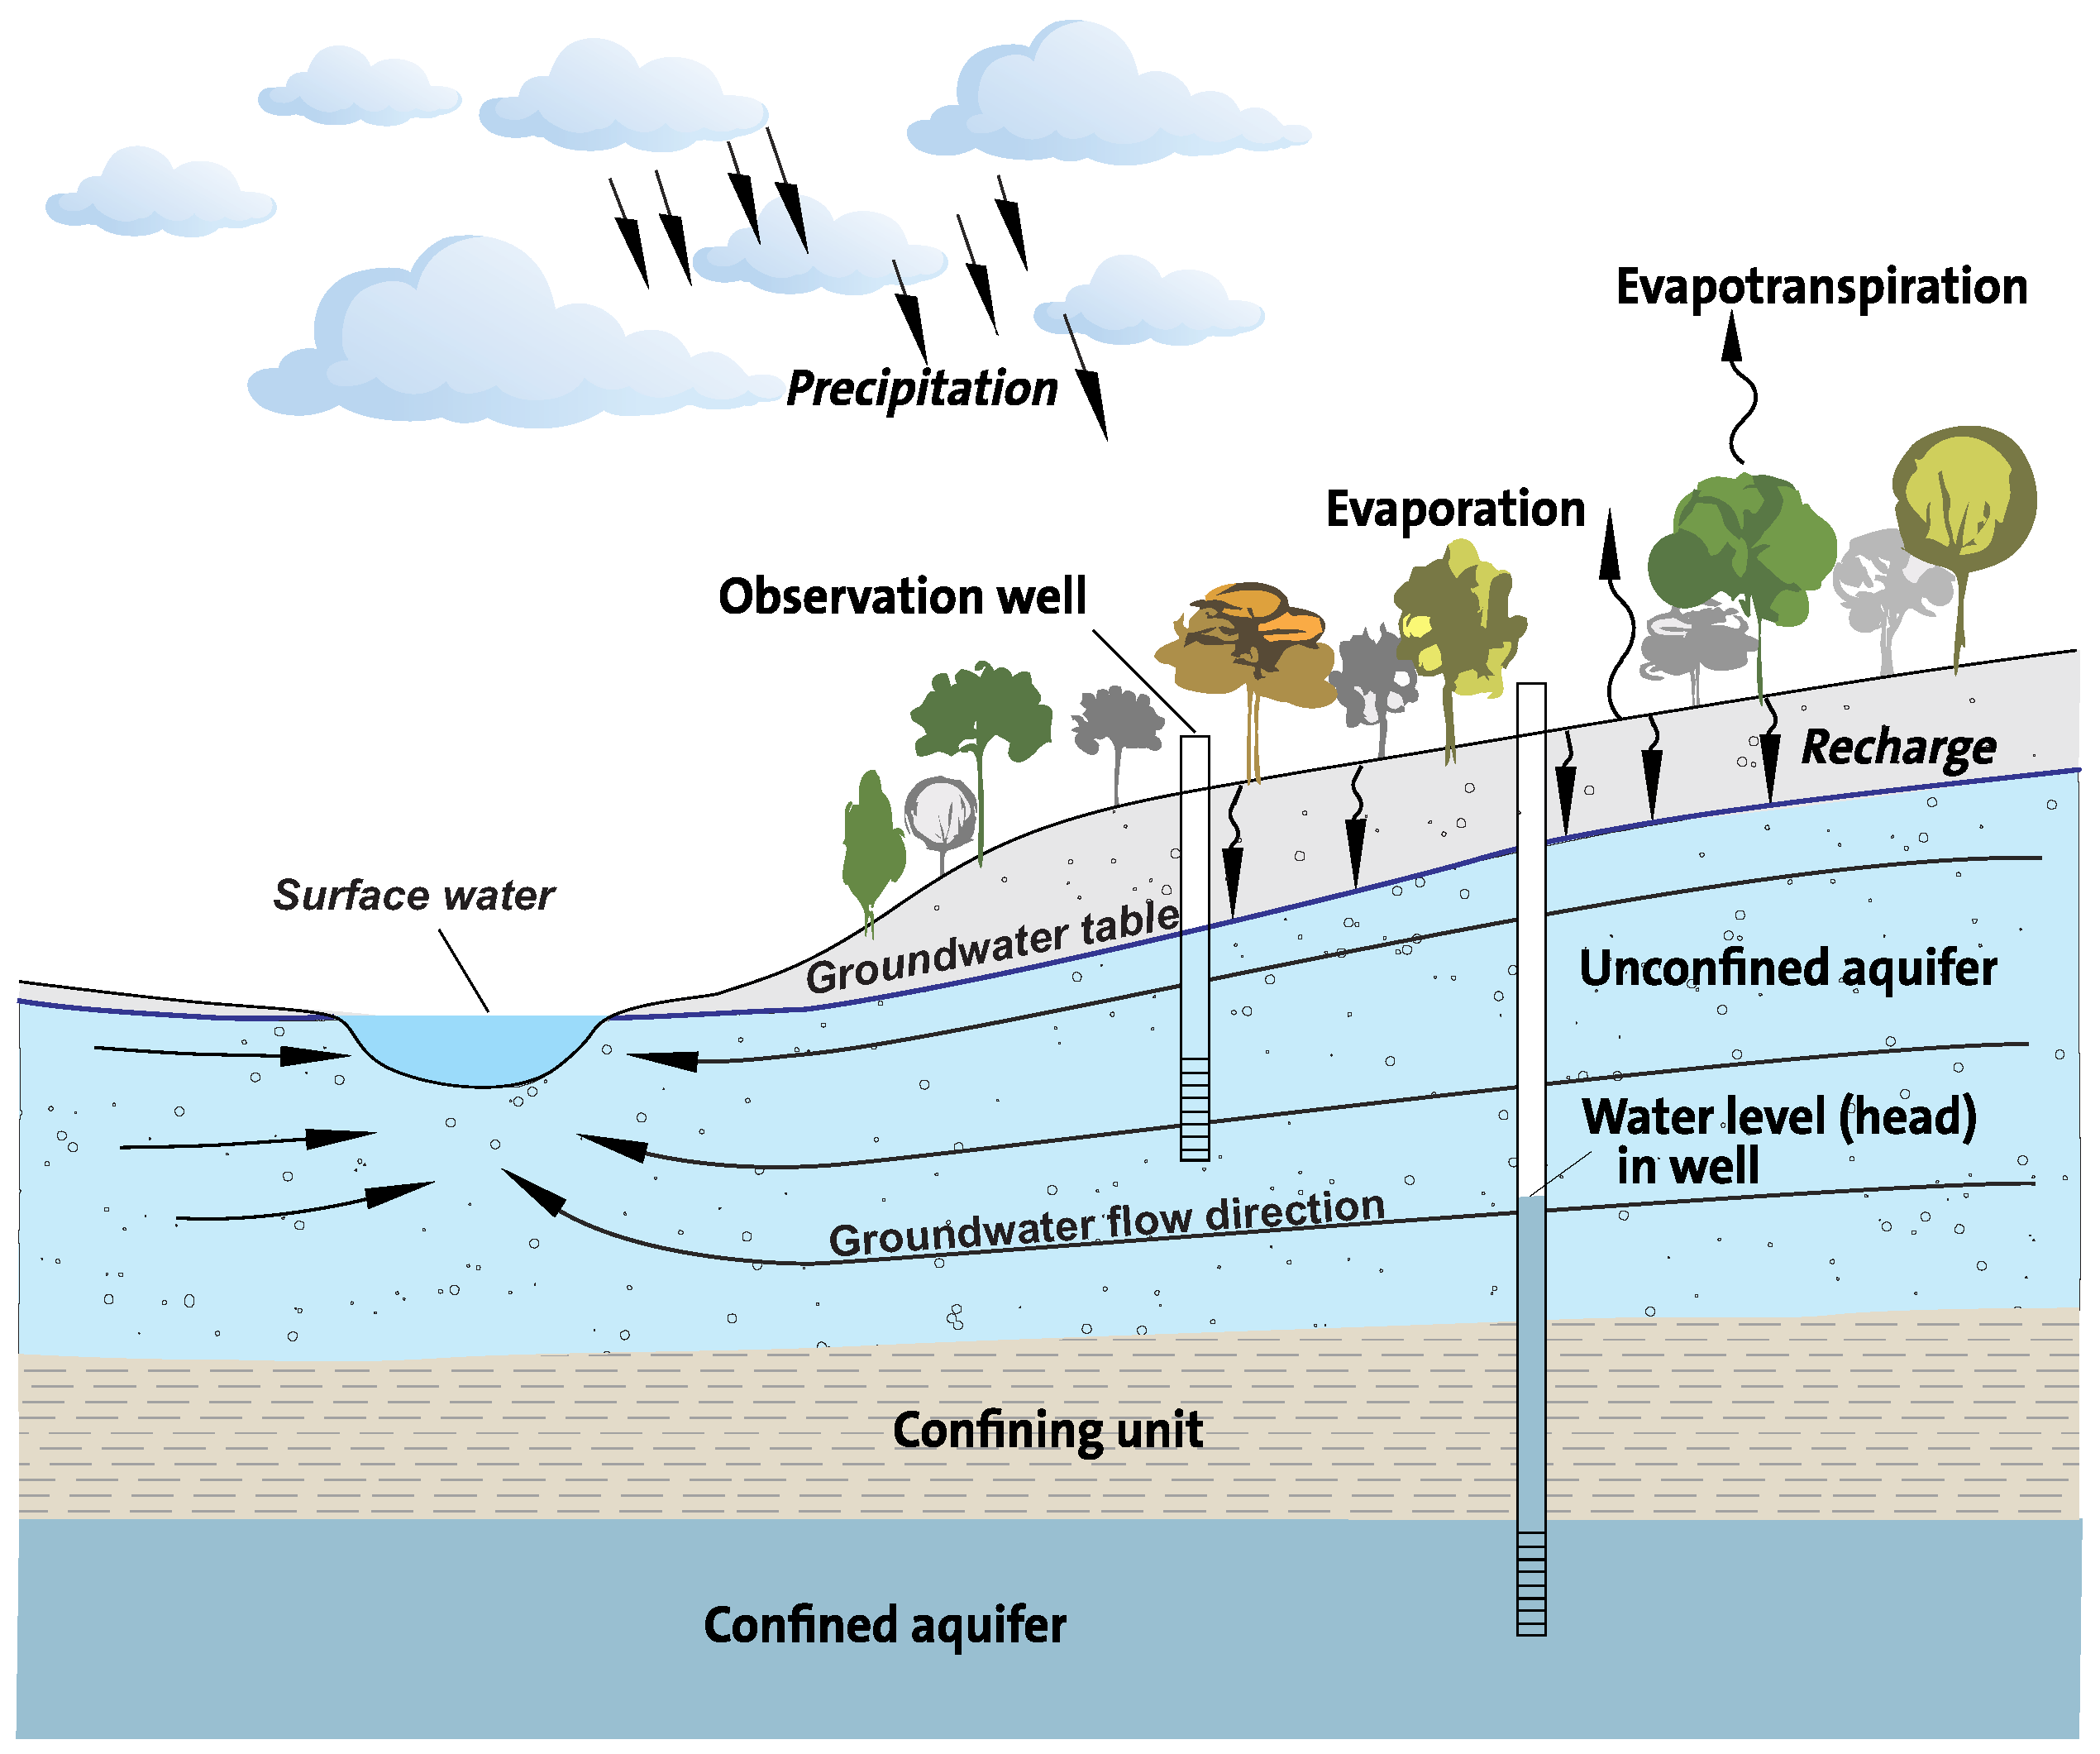 Applied Sciences | Free Full-Text | Groundwater Level Fluctuation Analysis  in a Semi-Urban Area Using Statistical Methods and Data Mining Techniques—A  Case Study in Wrocław, Poland